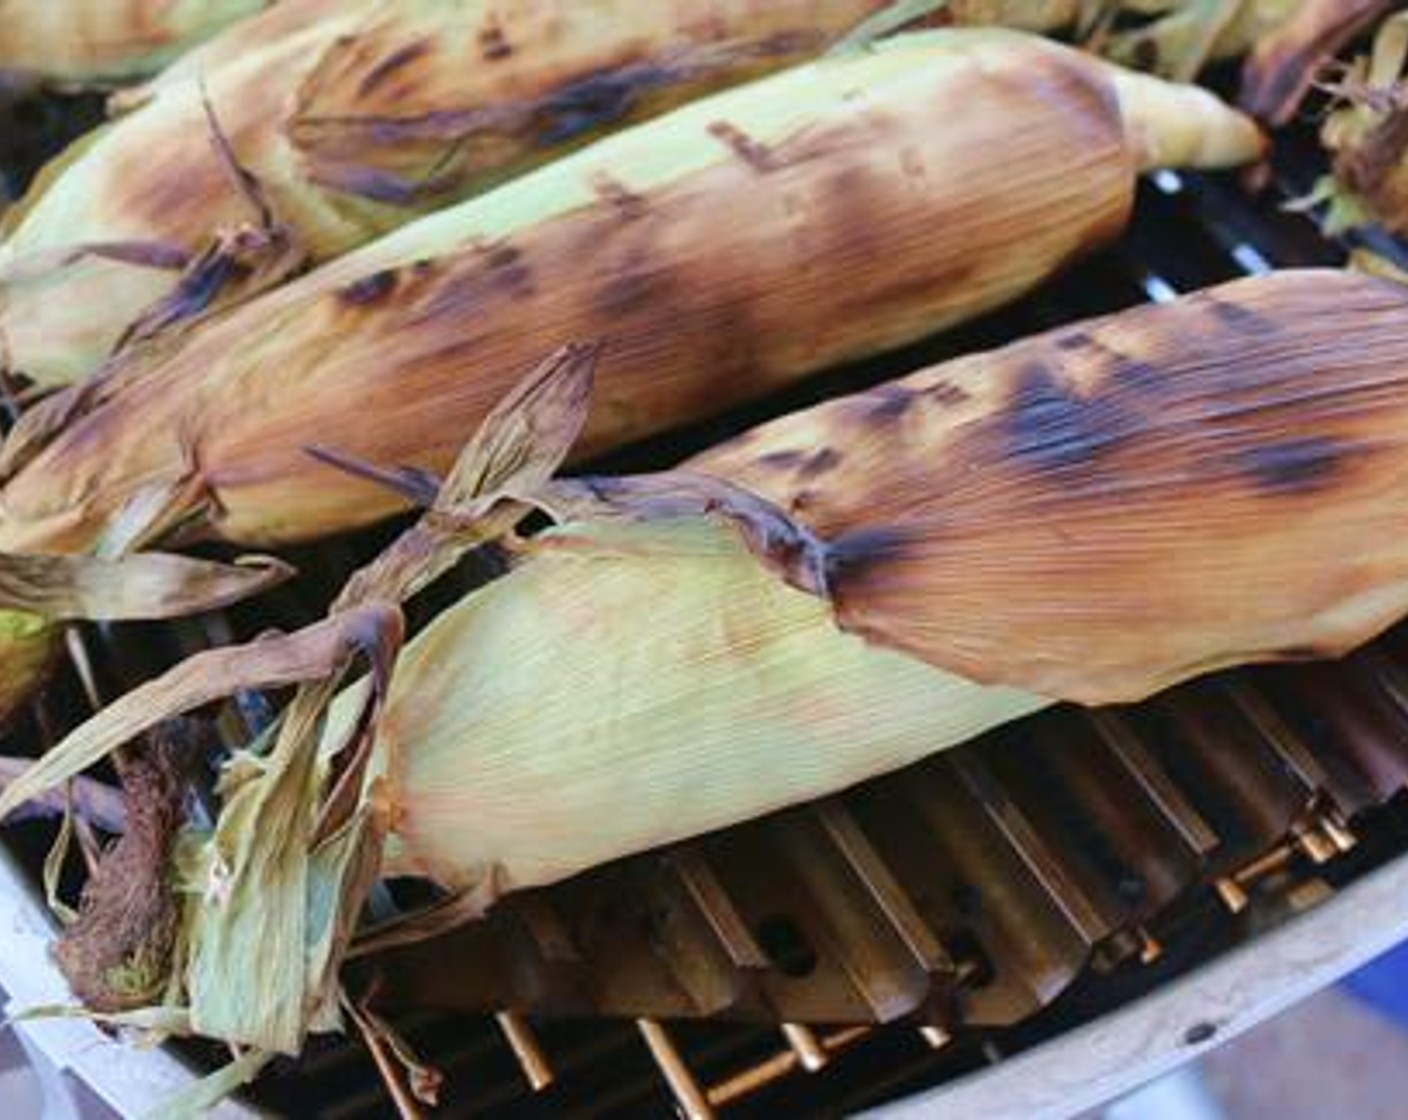 step 3 Peel back the husk and remove corn silt. Place directly over hot side of grill to char, 4-5 minutes rotating as necessary.